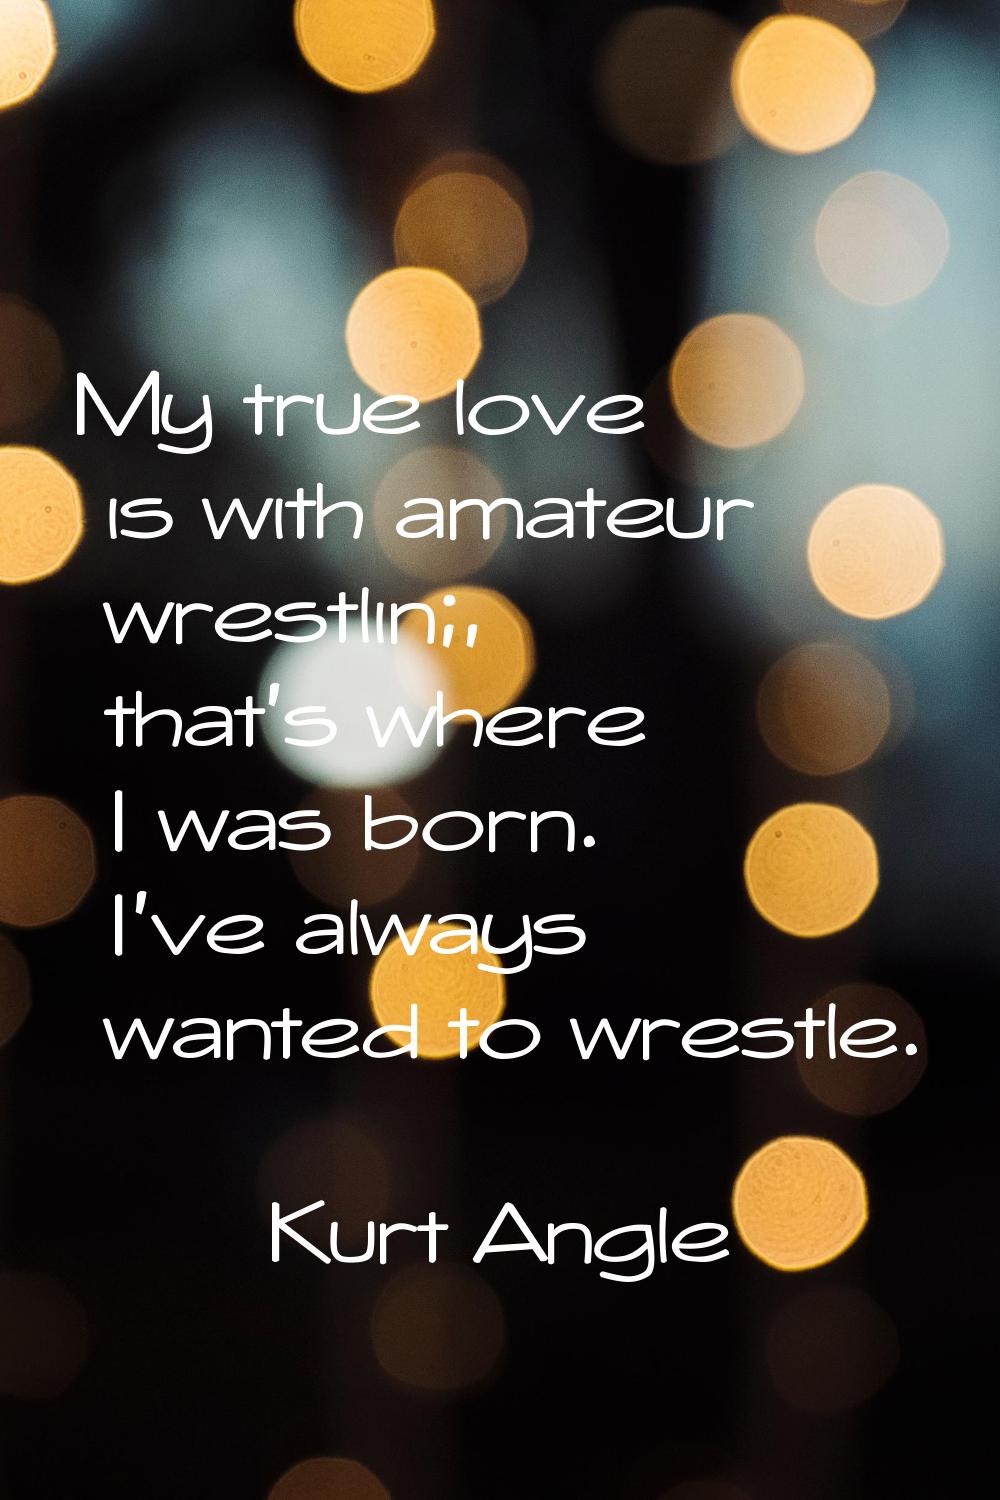 My true love is with amateur wrestlin;, that's where I was born. I've always wanted to wrestle.